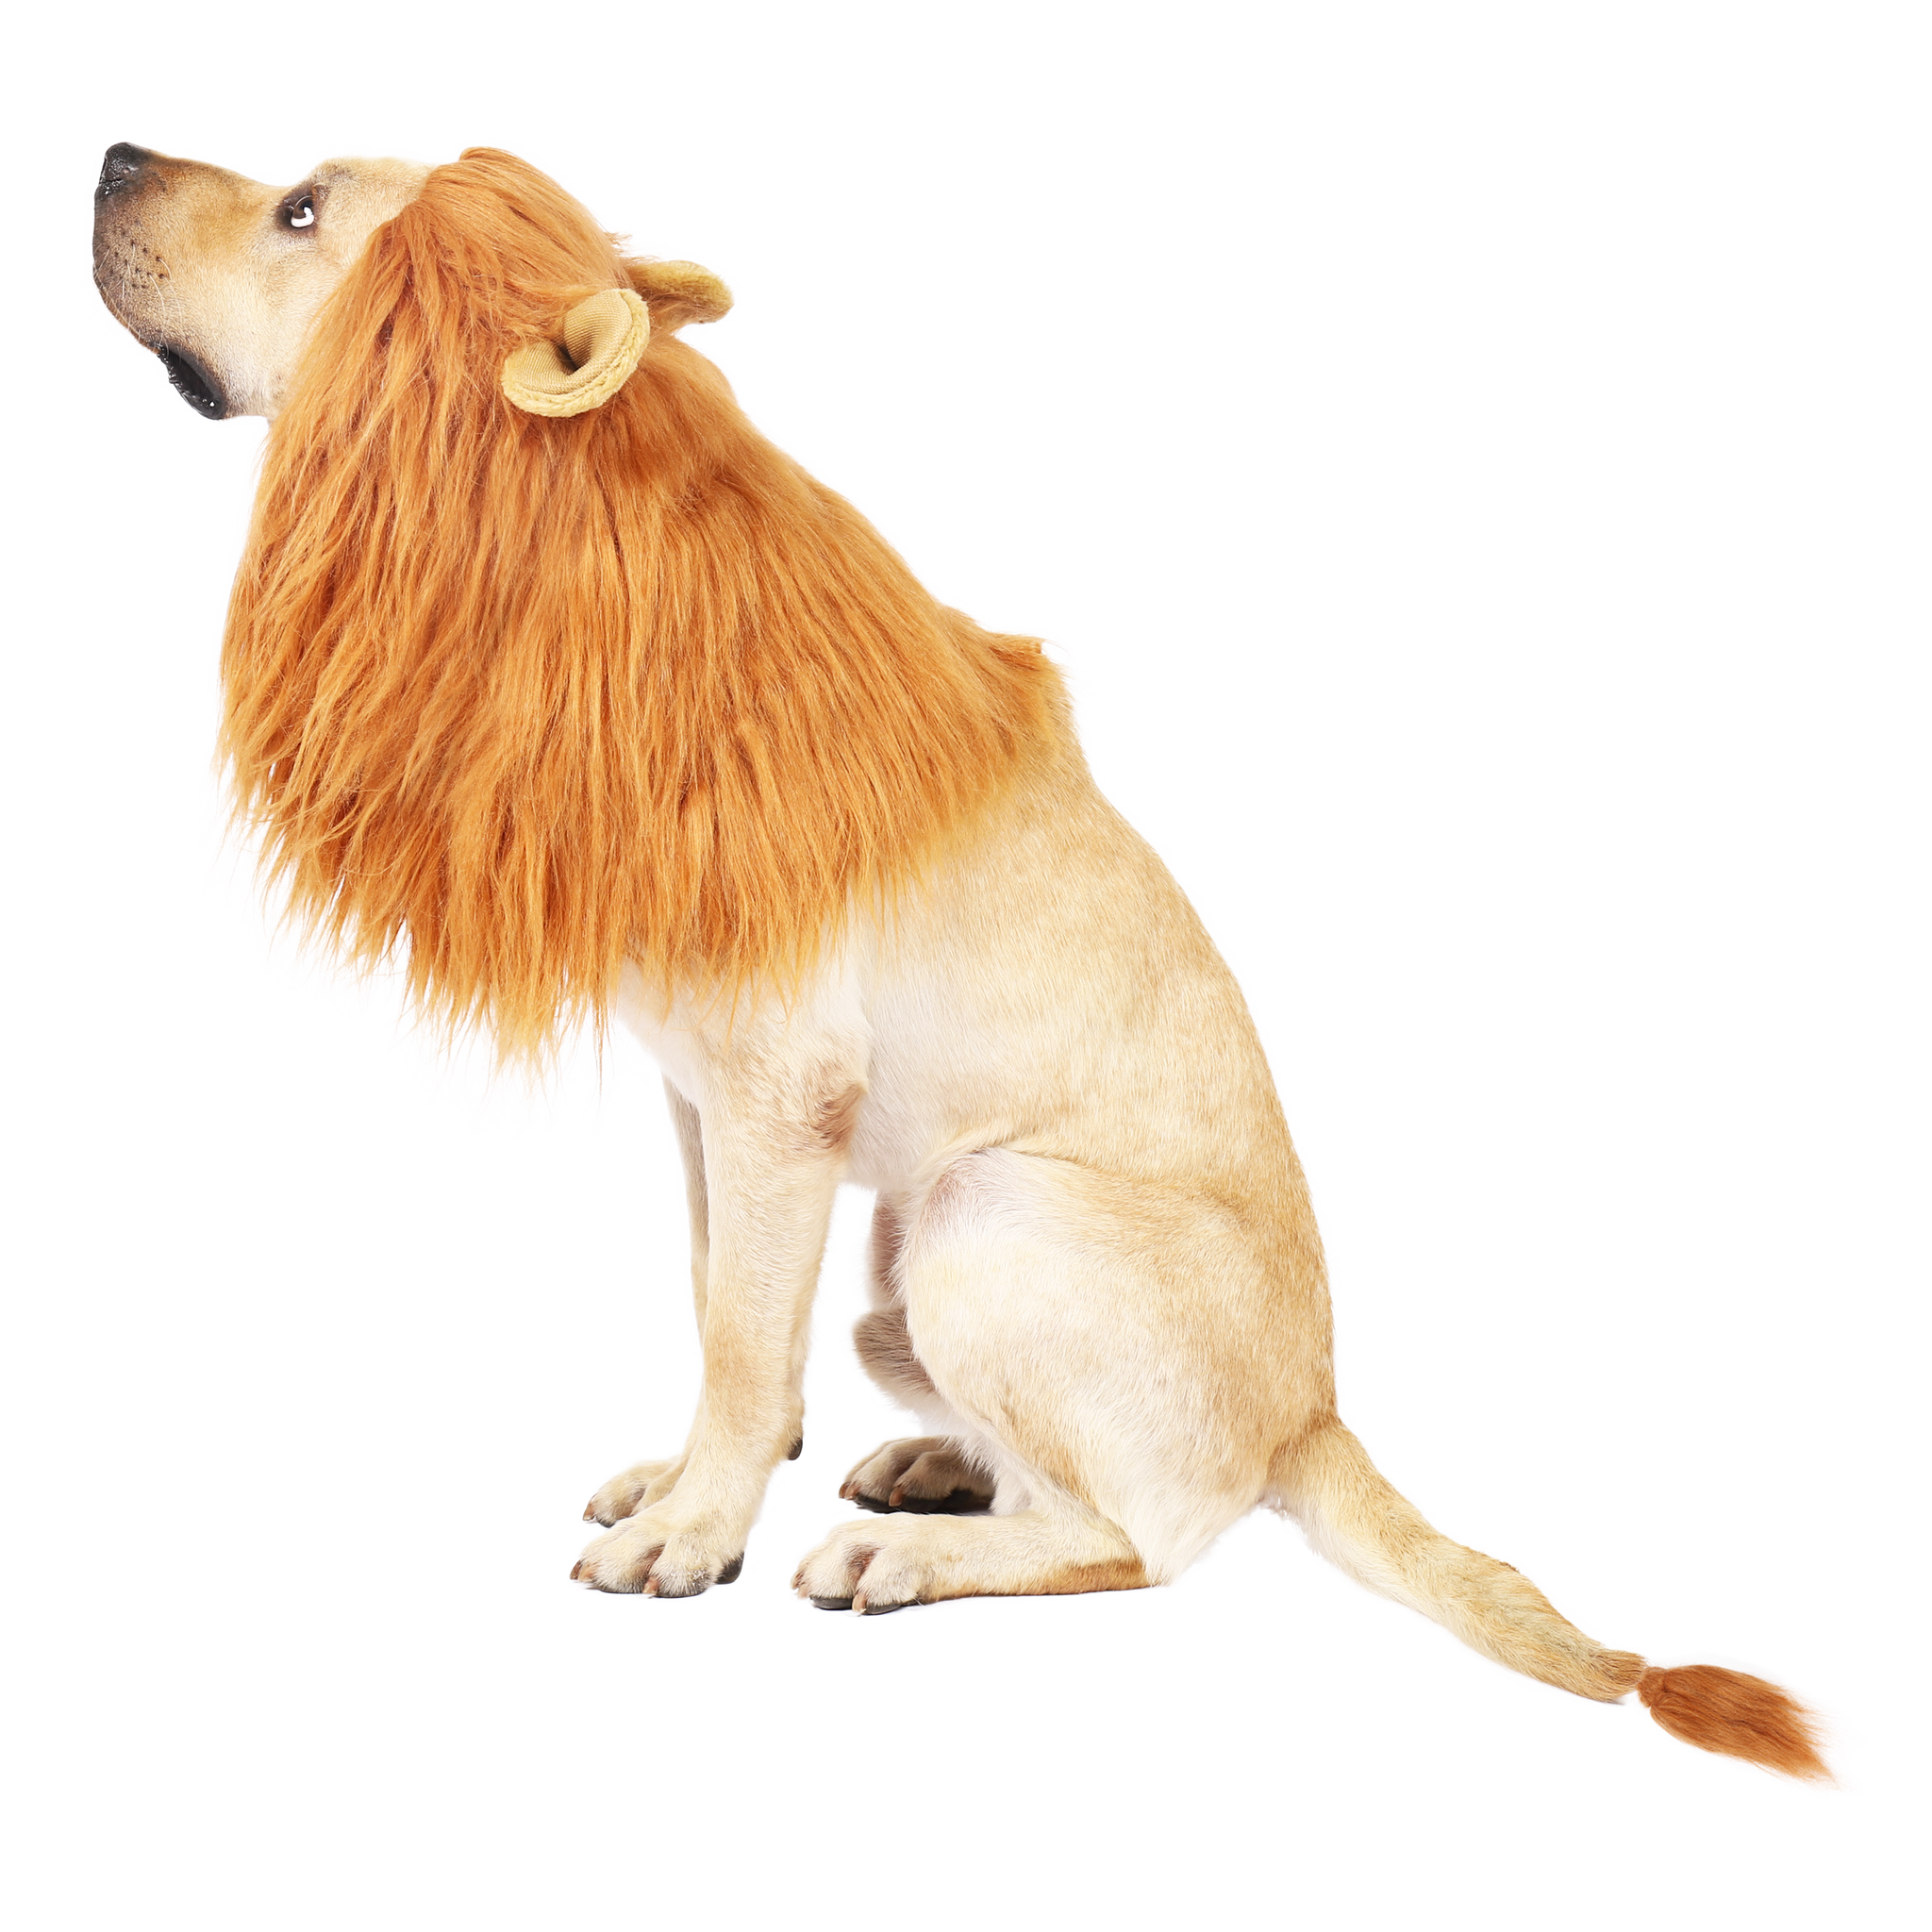 lion costumes for dogs